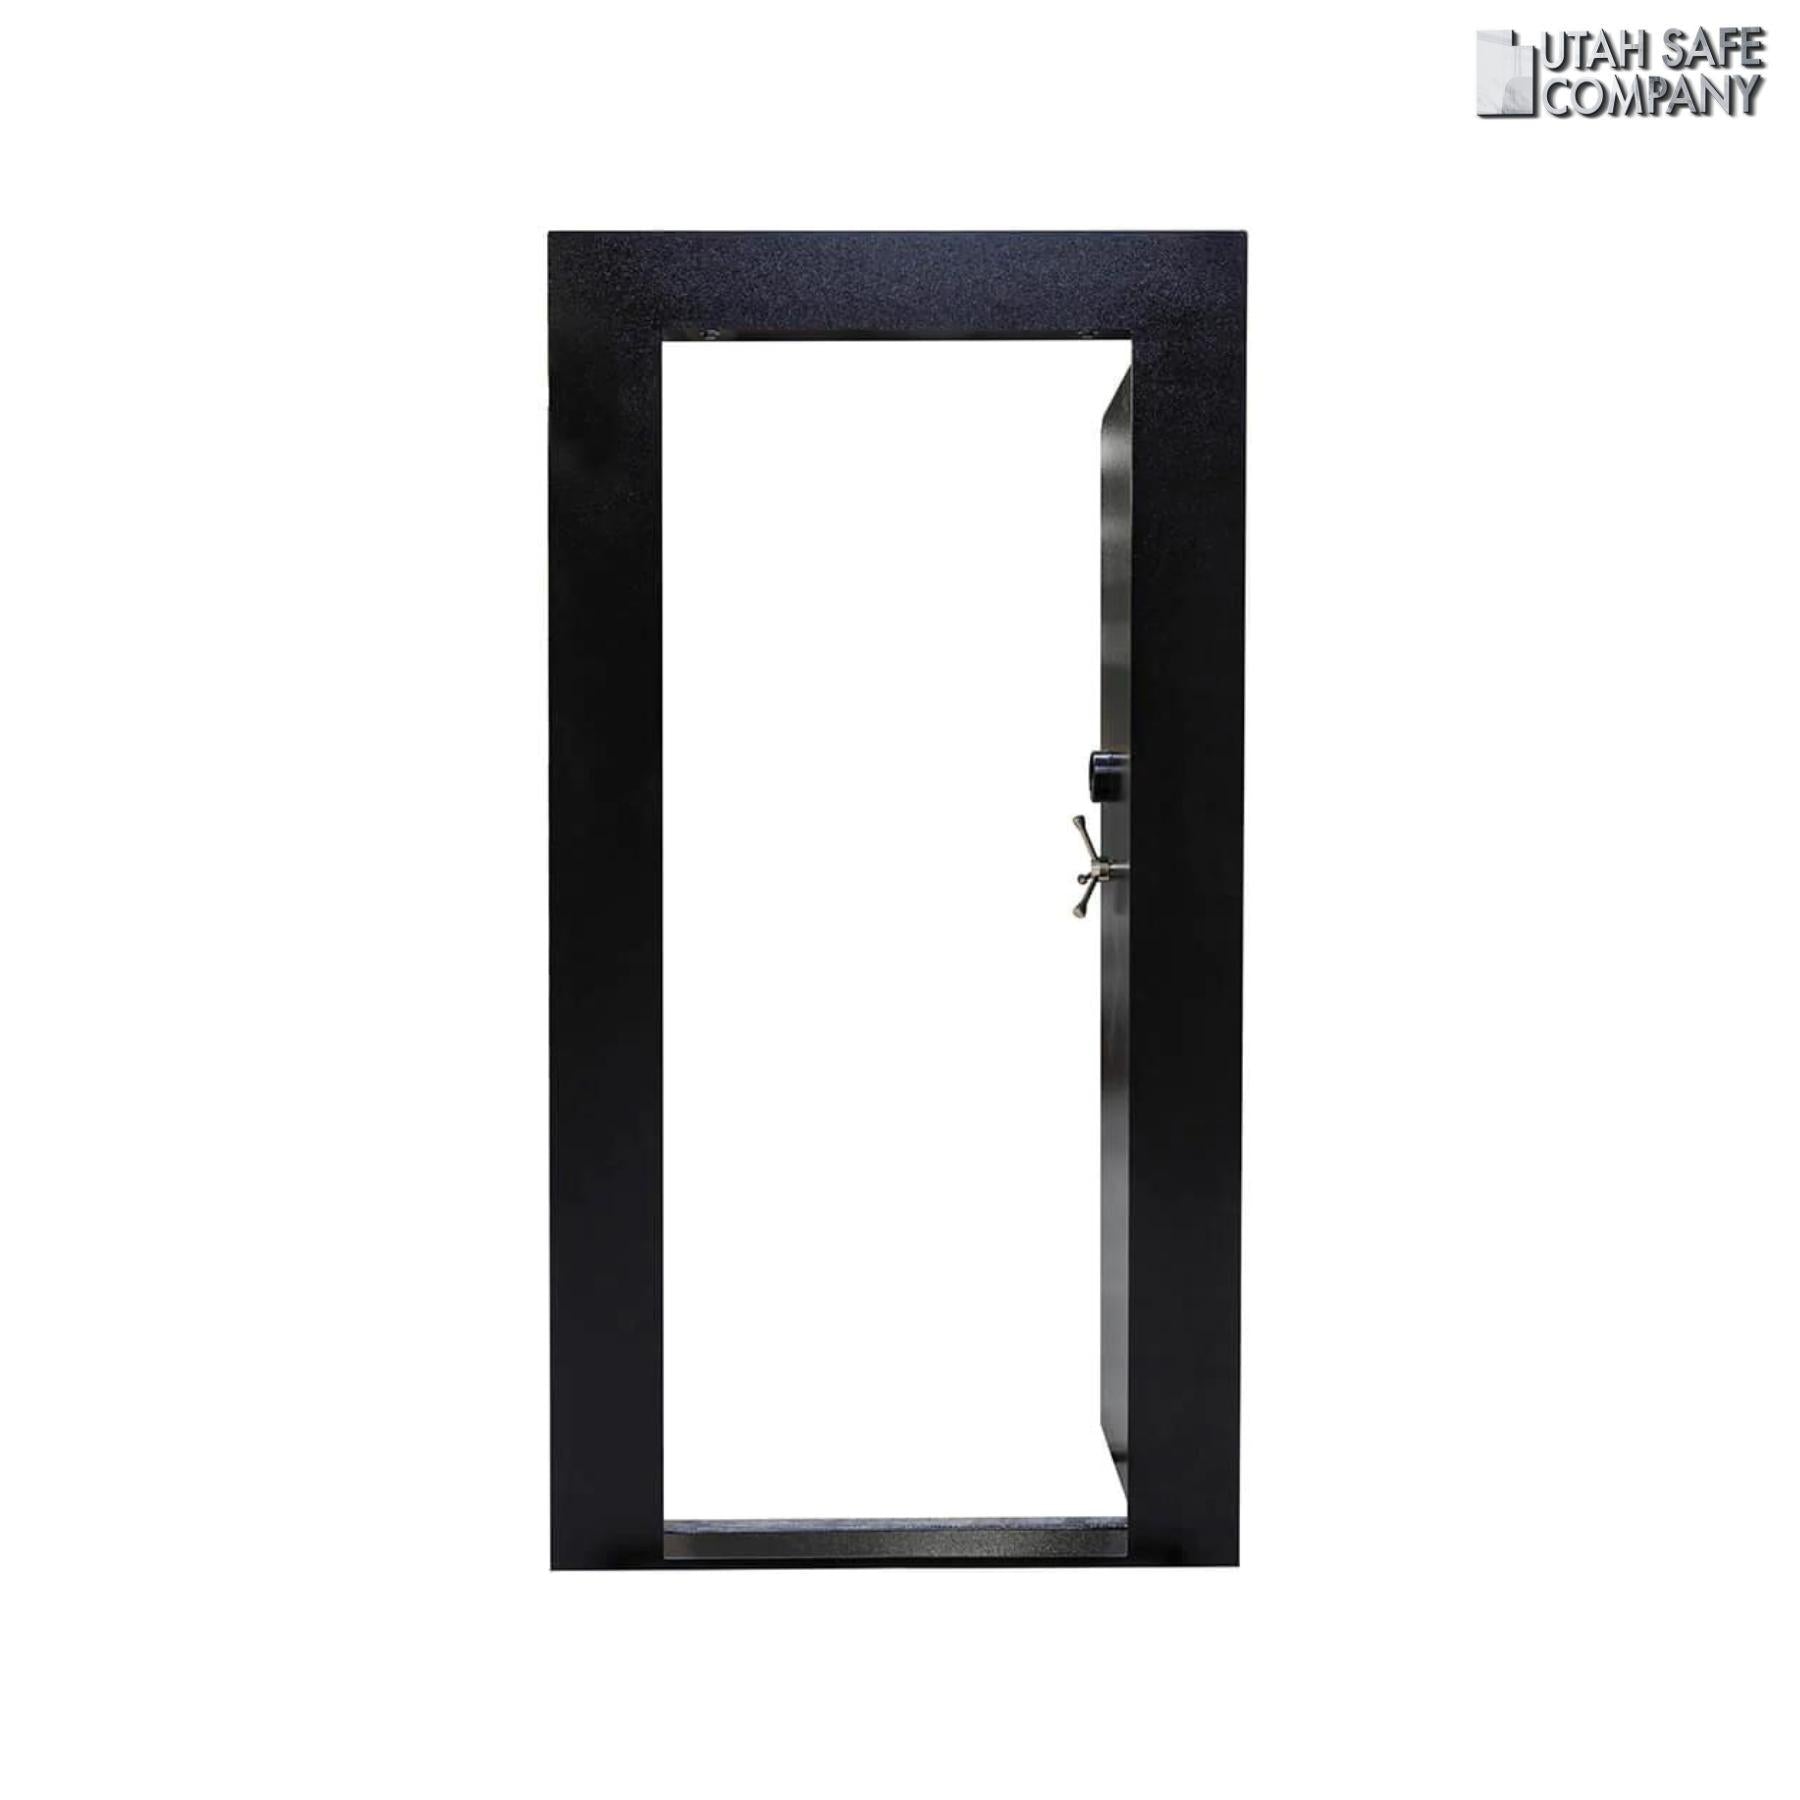 Liberty In-Swing Plate Vault Door (Either Left or Right Hinge) - Utah Safe Company